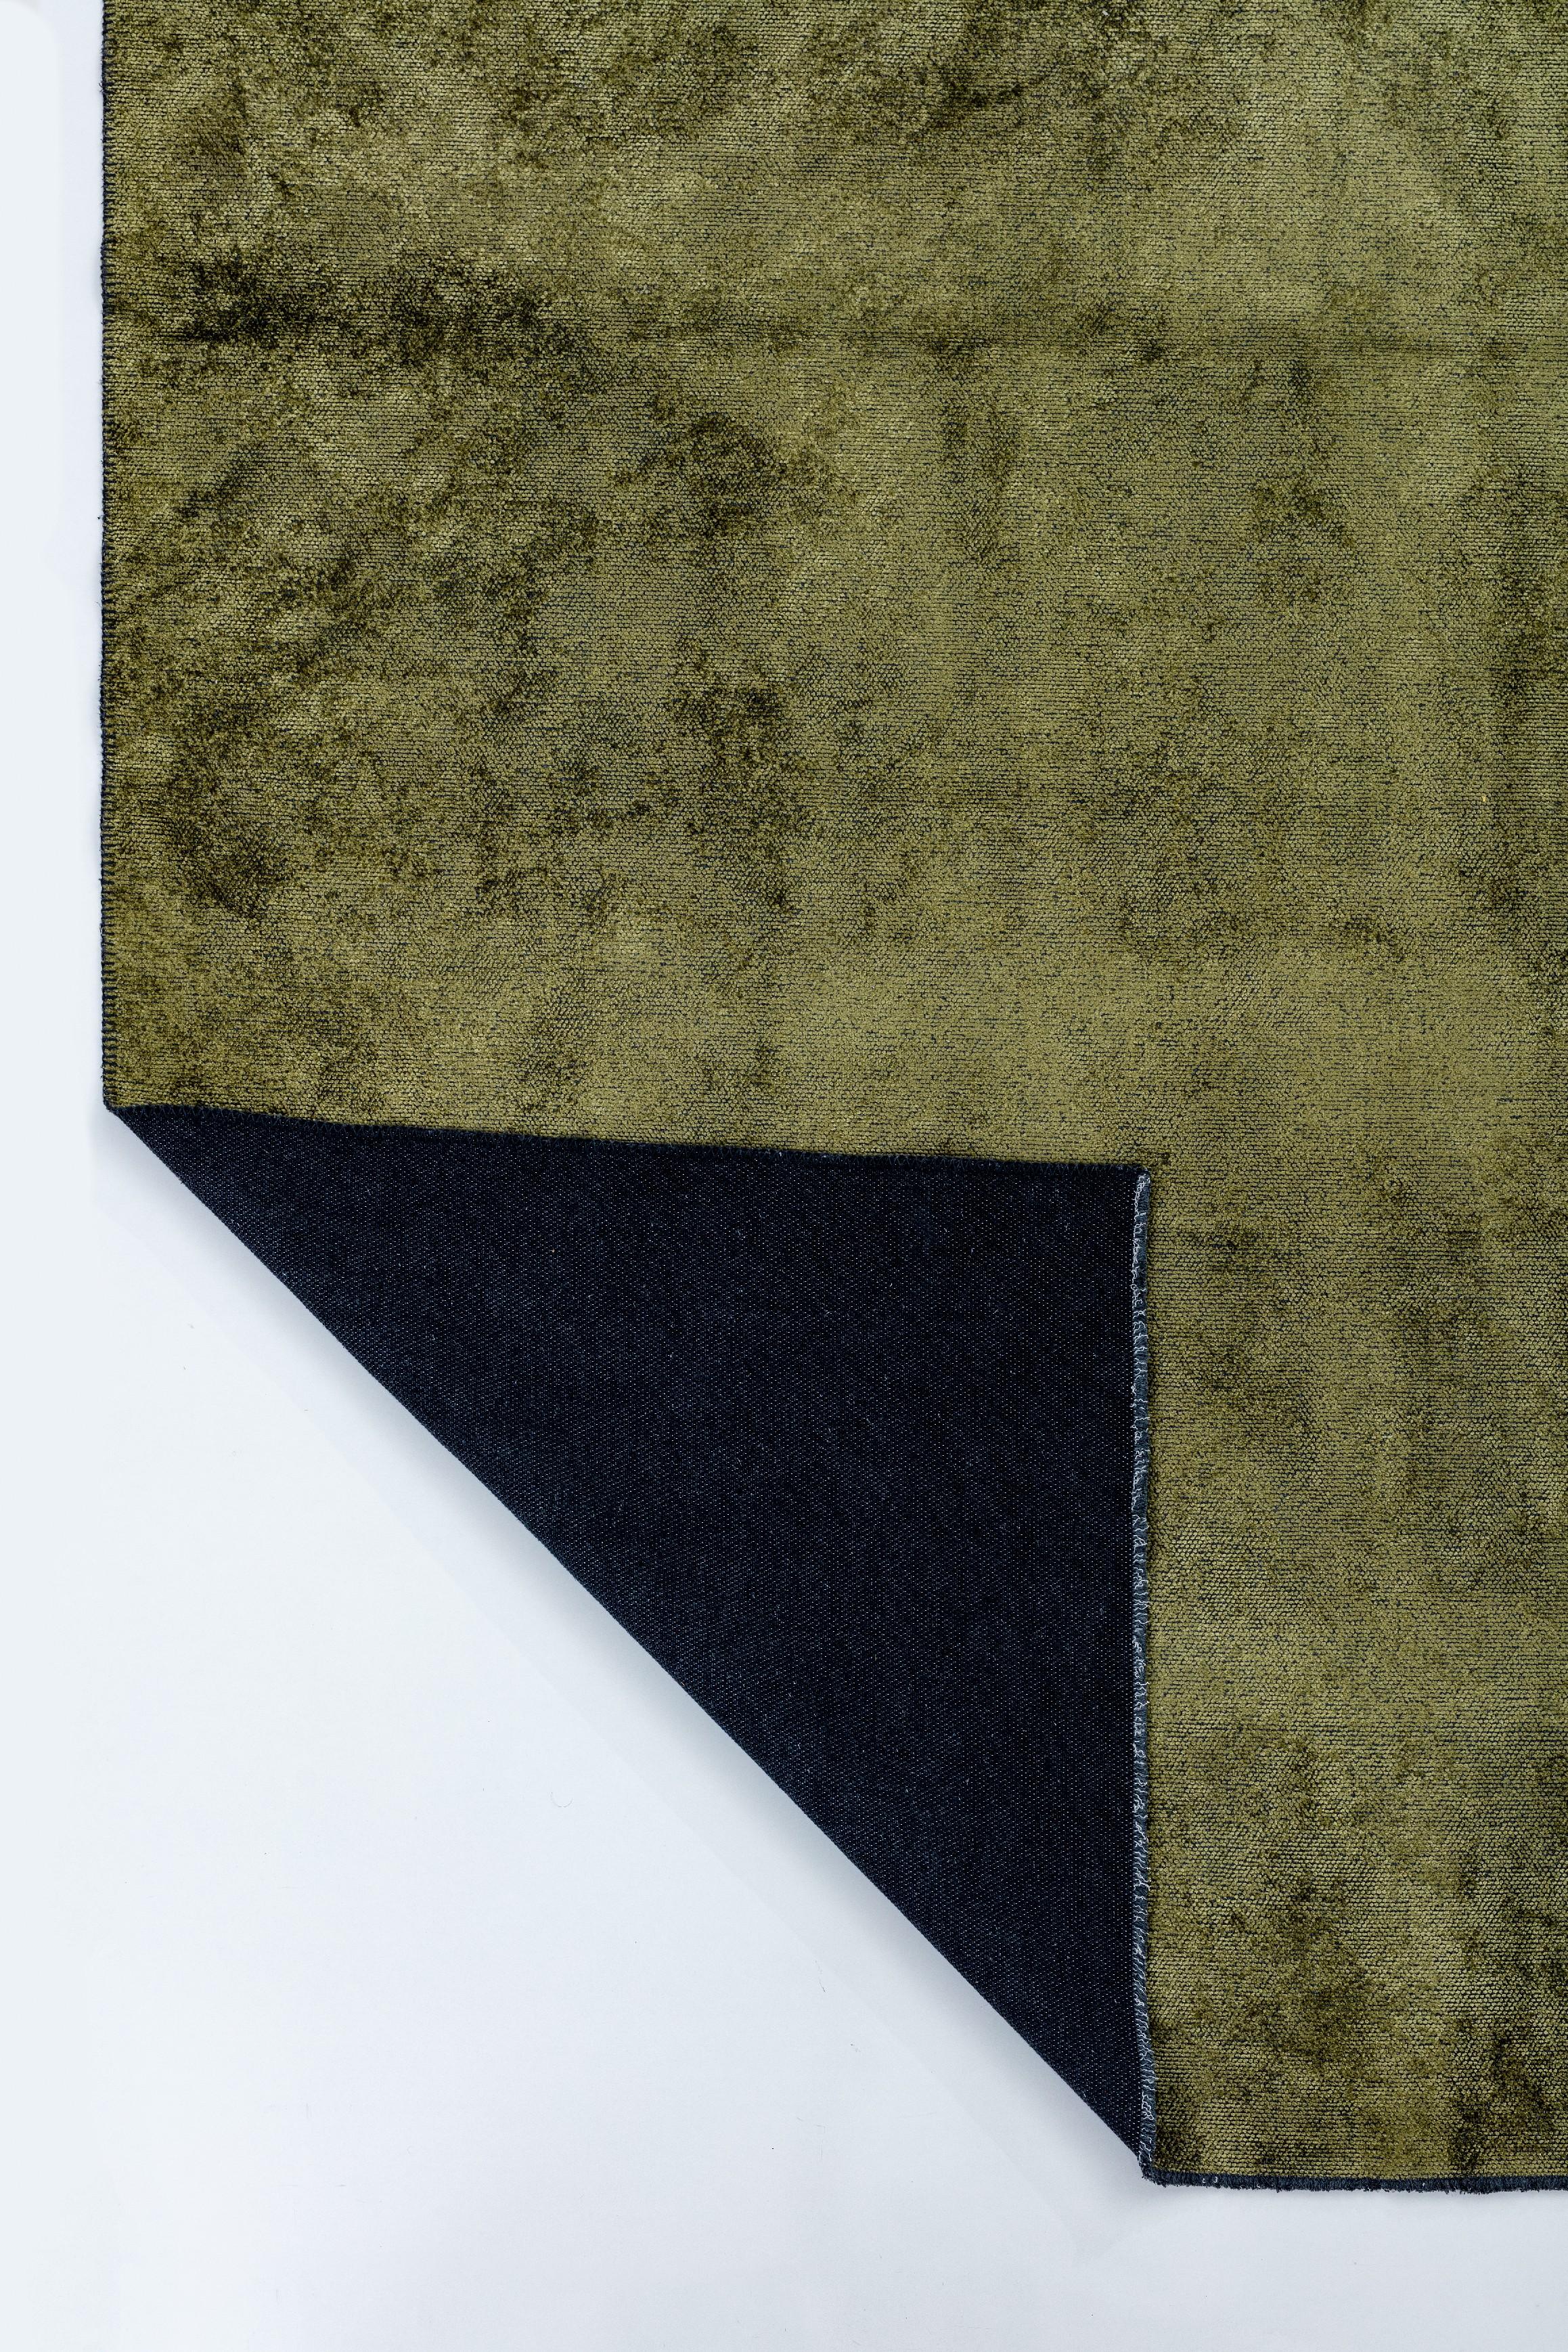 For Sale:  (Green) Modern Solid Color Luxury Area Rug 3